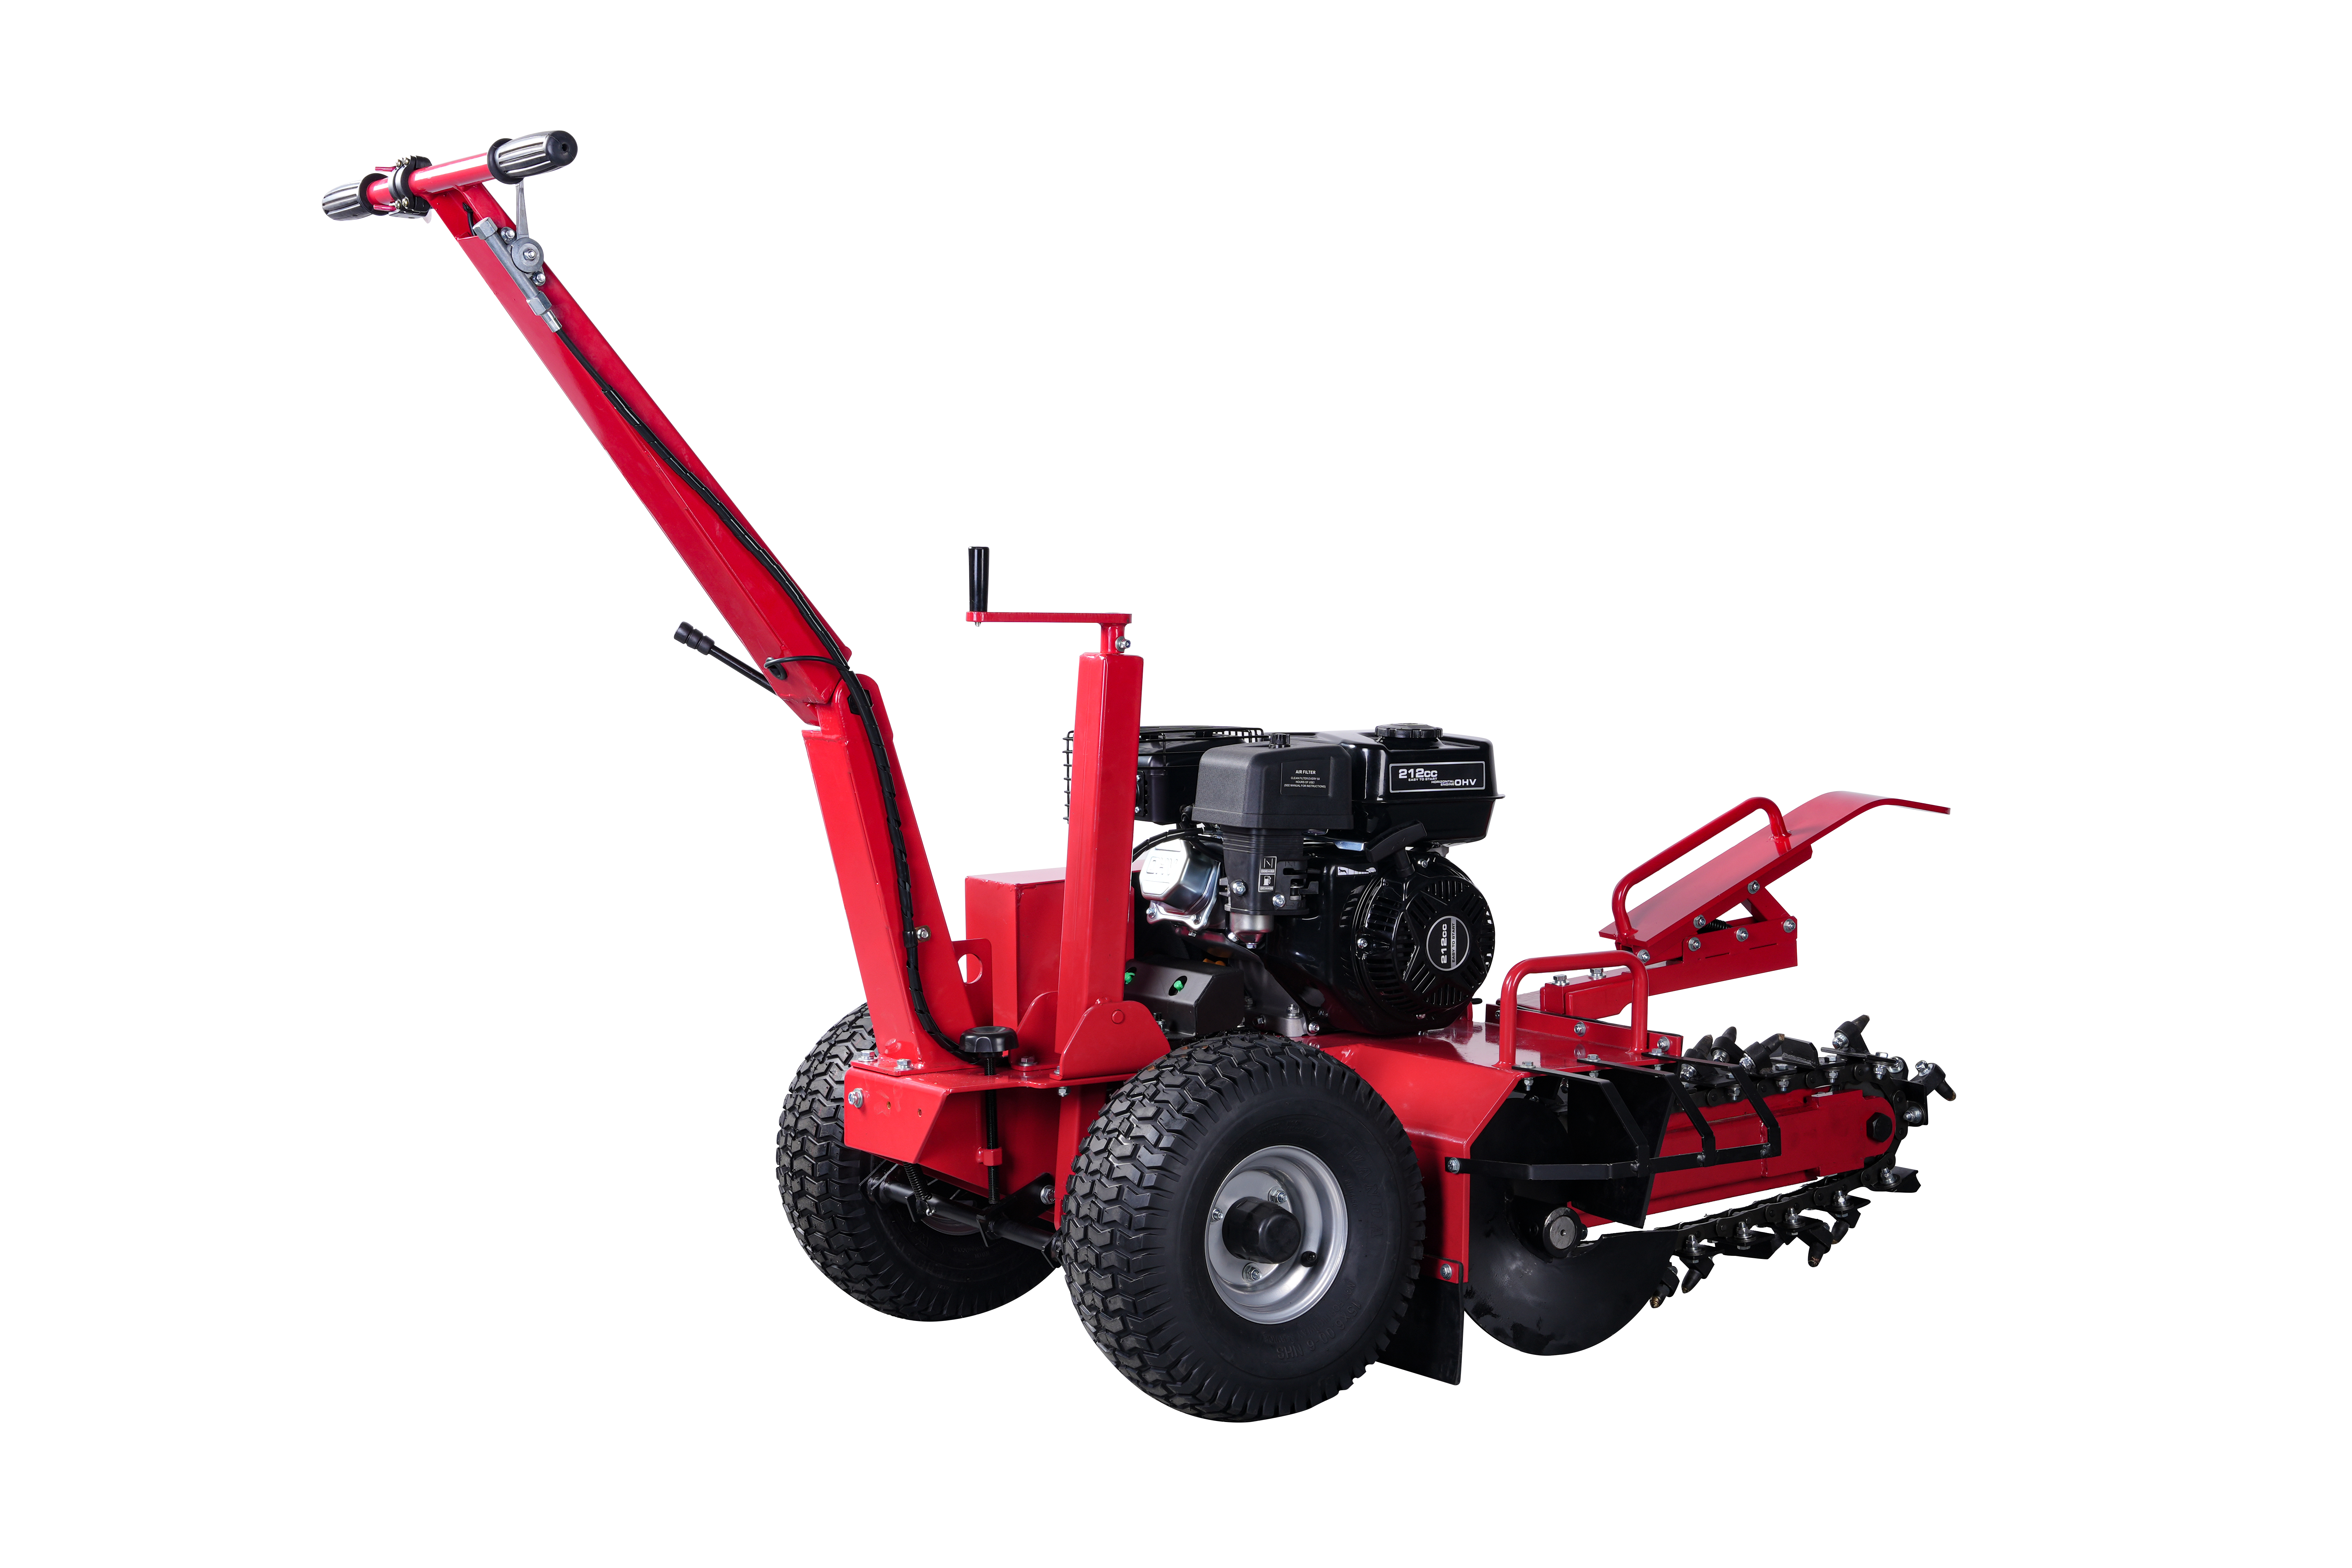 K-MAXPOWER 450MM DEPTH DR-TR-7 TRENCHER 